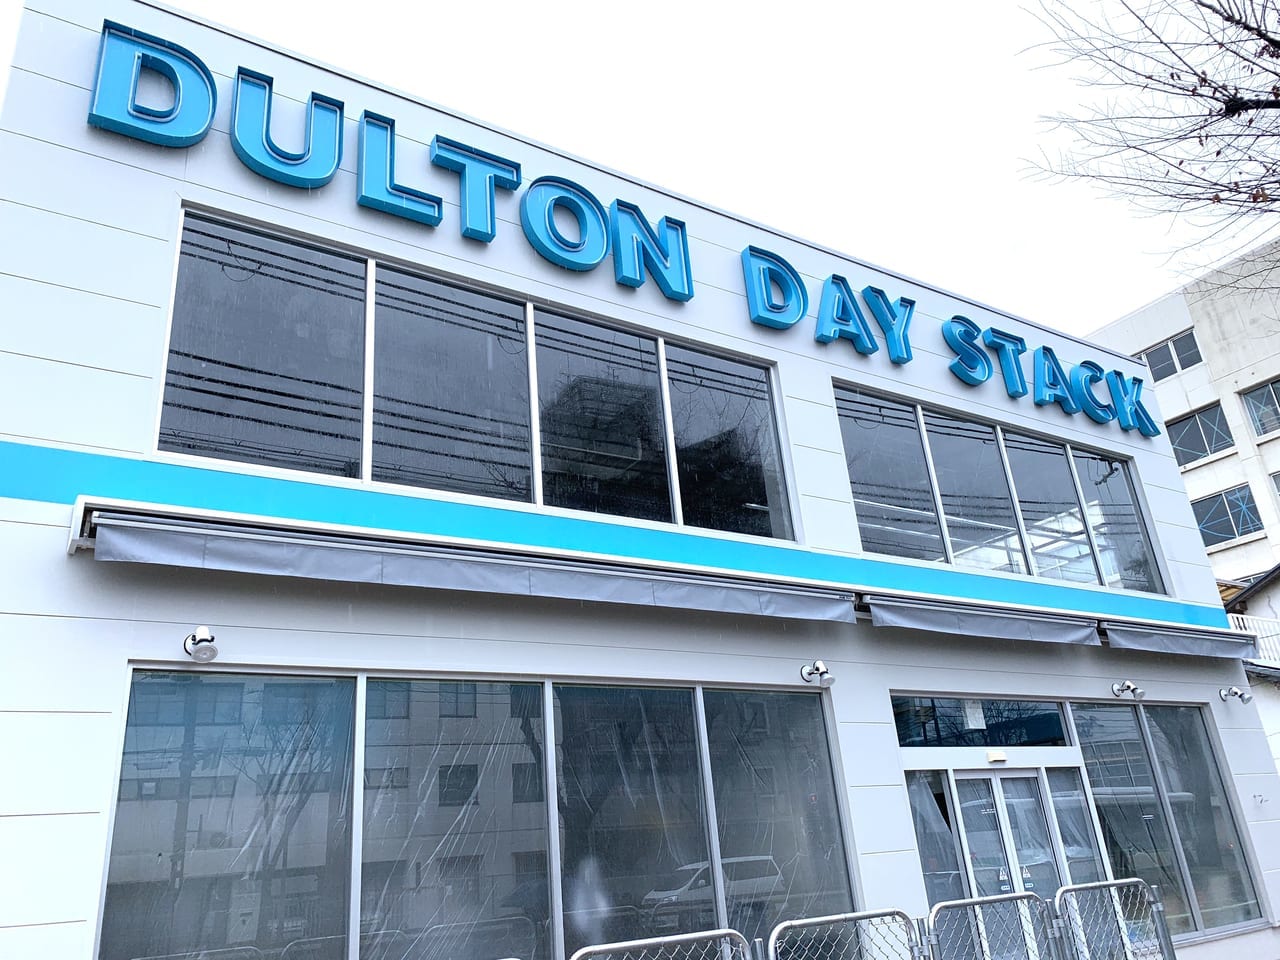 DULTON DAY STACK 正面